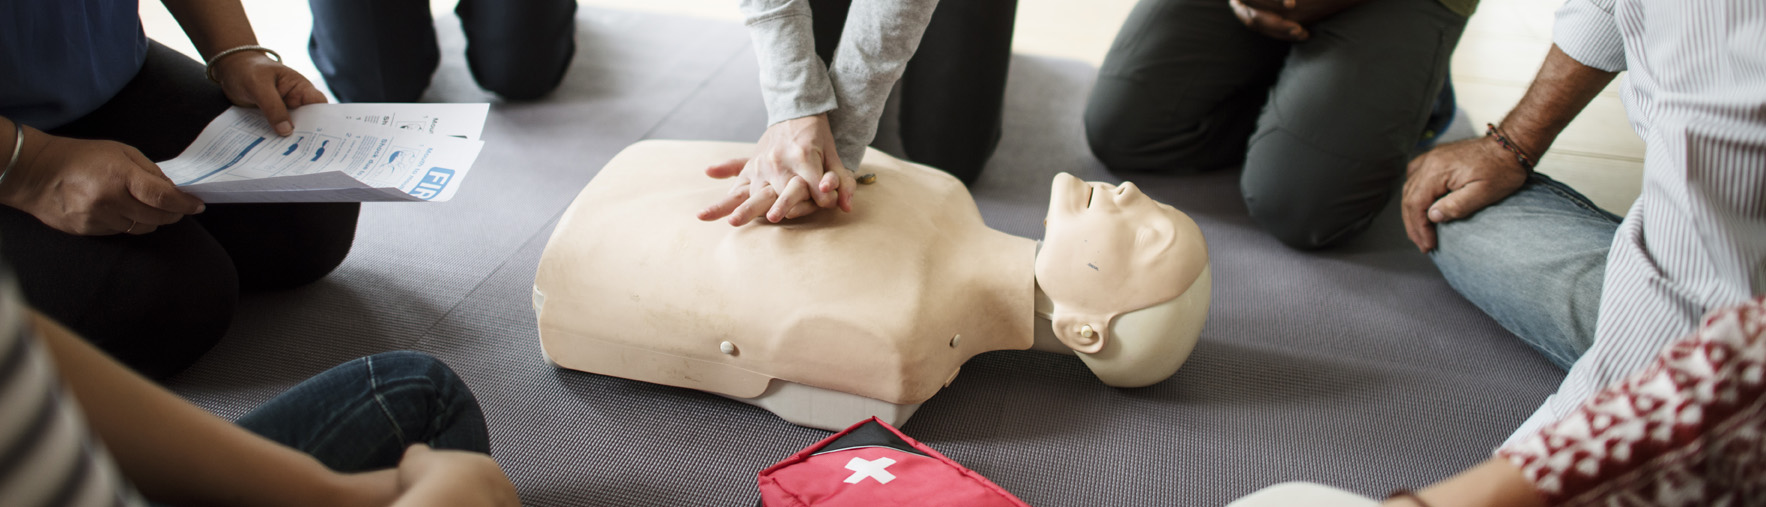 classes in CPR AED First Aid for all skill levels